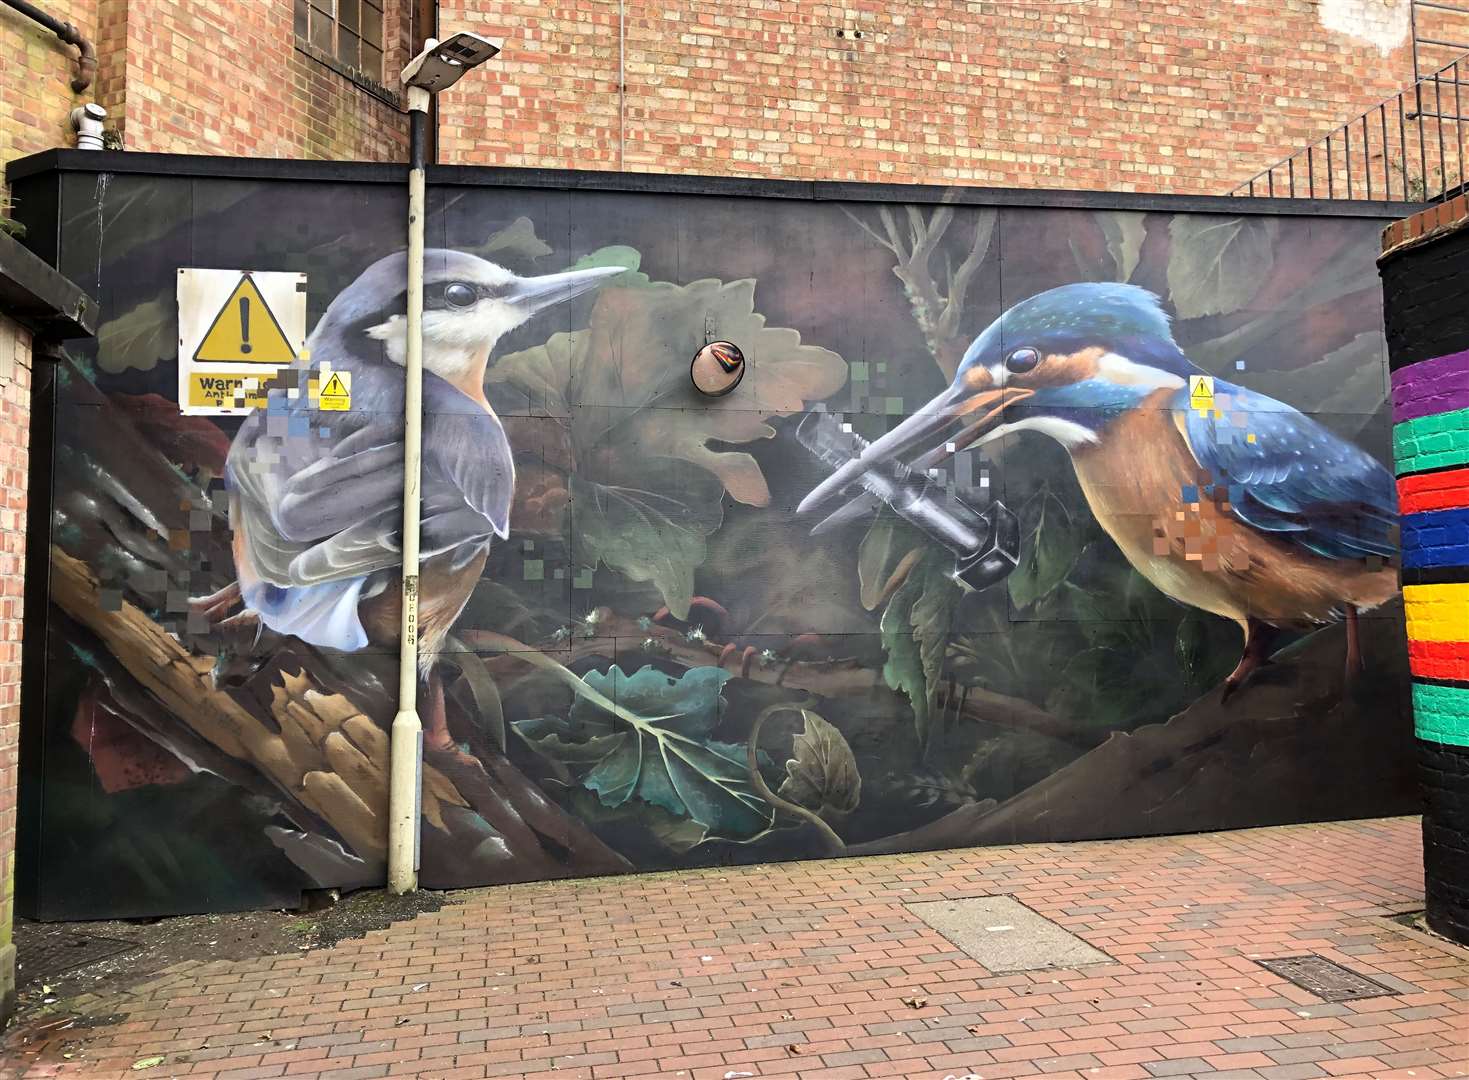 A mural by the Vicarage Lane car park in Ashford, was also created as part of the UNFRAMED art project